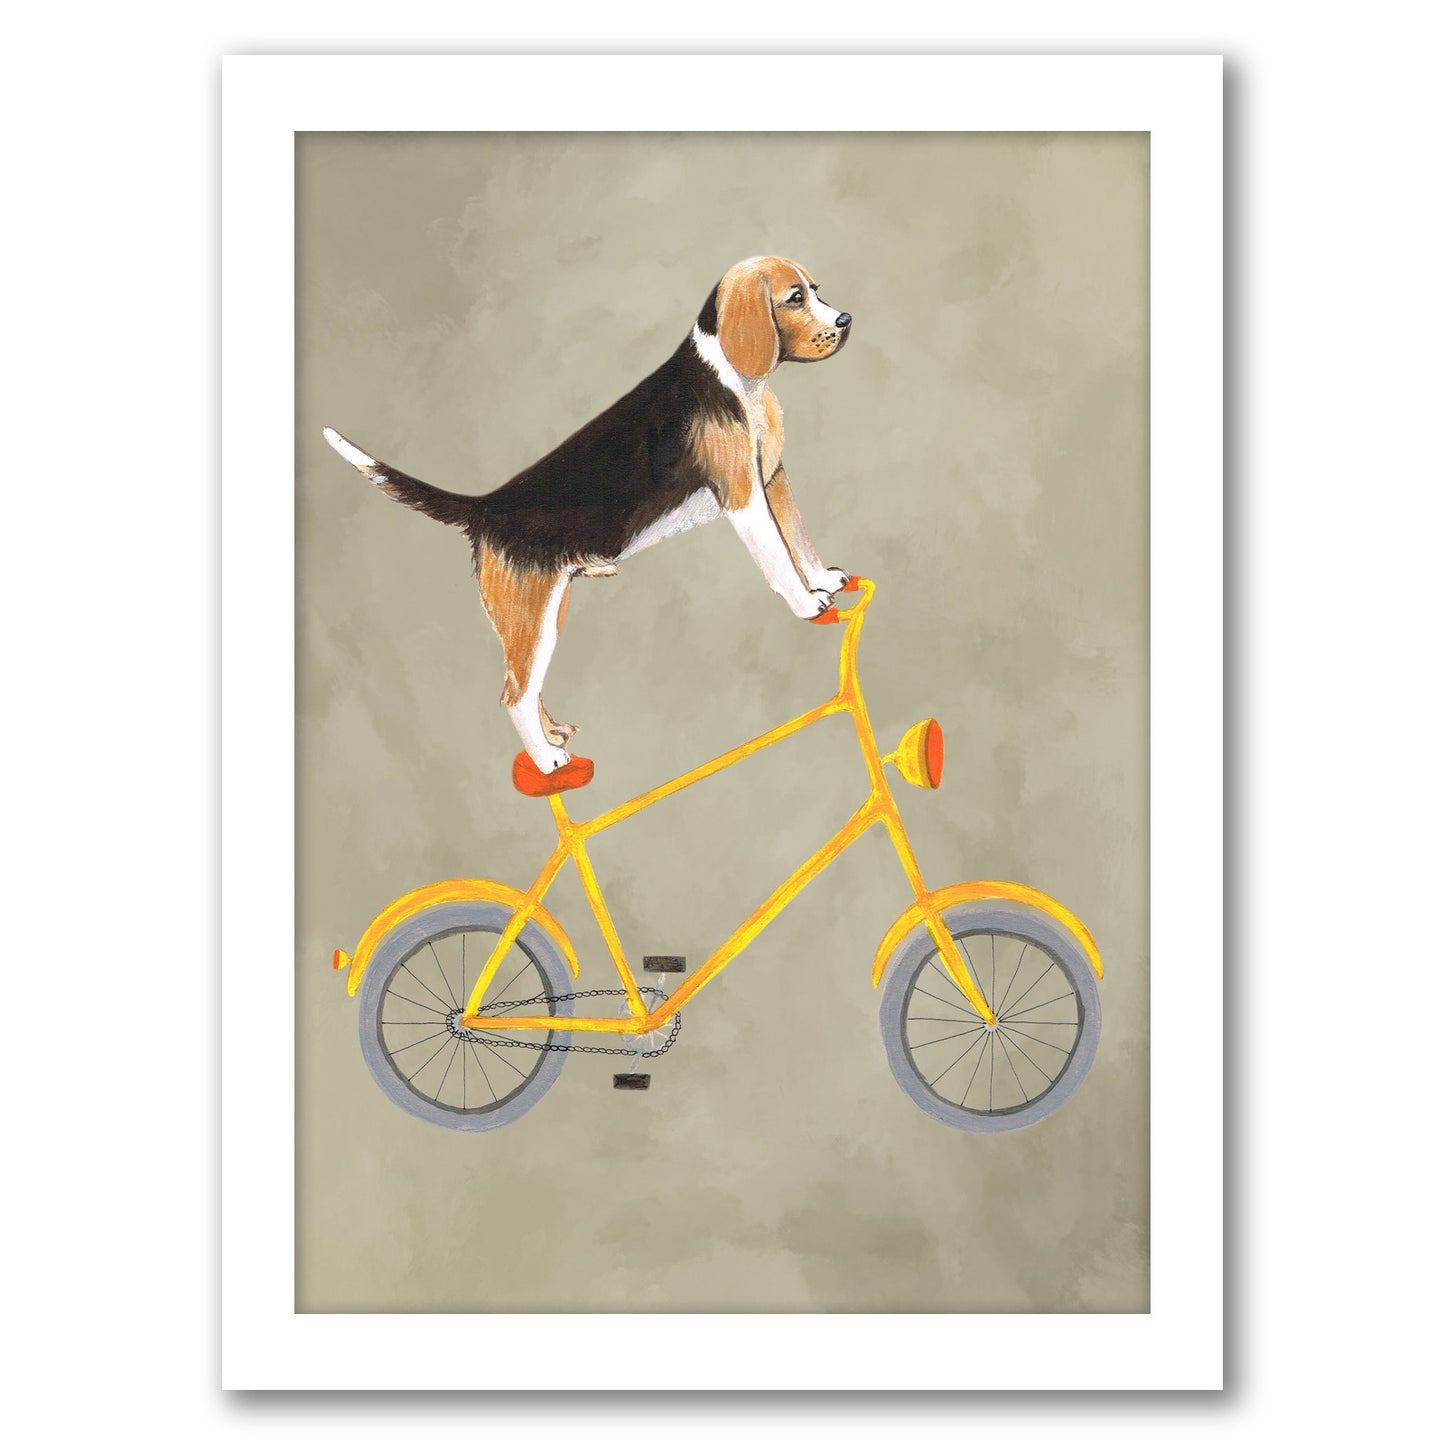 Beagle On Bicycle By Coco De Paris - Framed Print